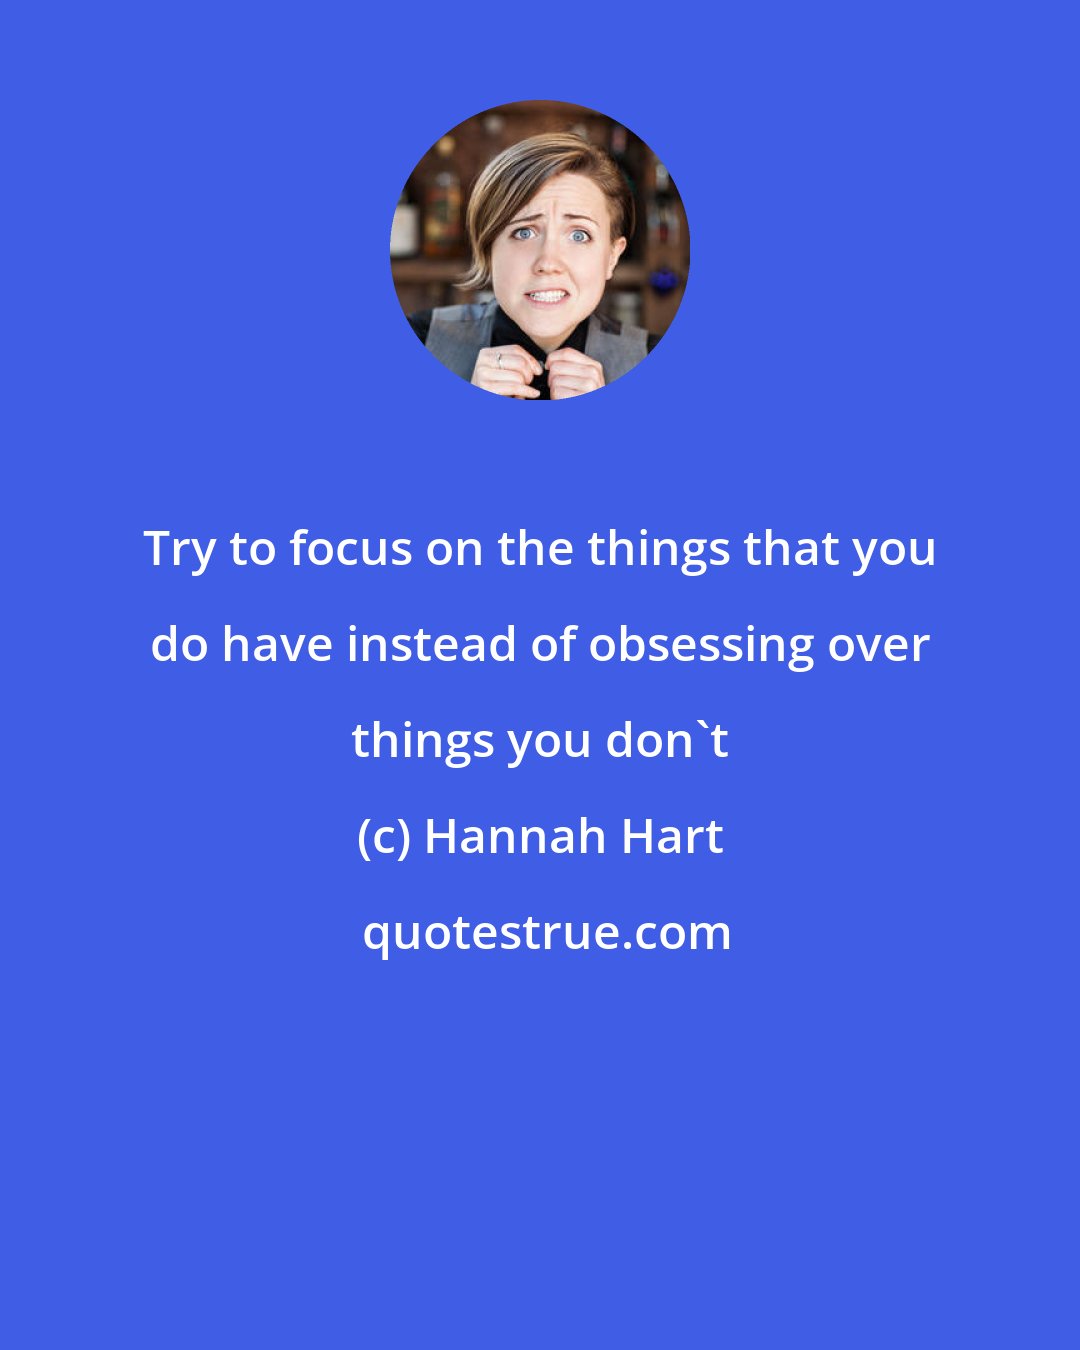 Hannah Hart: Try to focus on the things that you do have instead of obsessing over things you don't